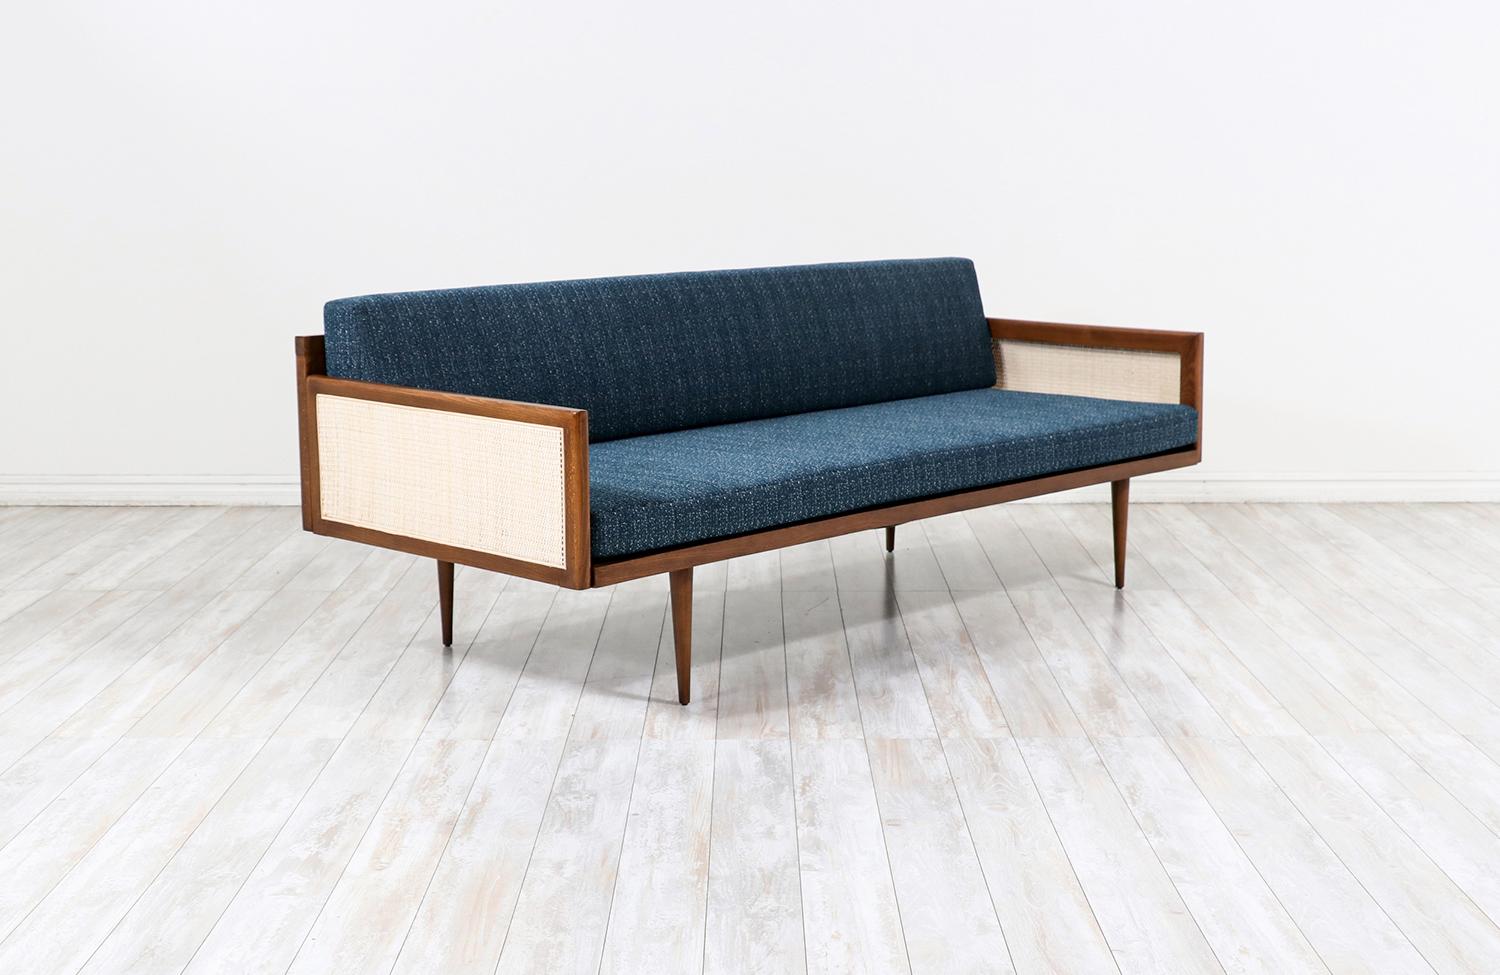 American Expertly Restored - Mid-Century Modern Walnut & Cane Daybed Sofa